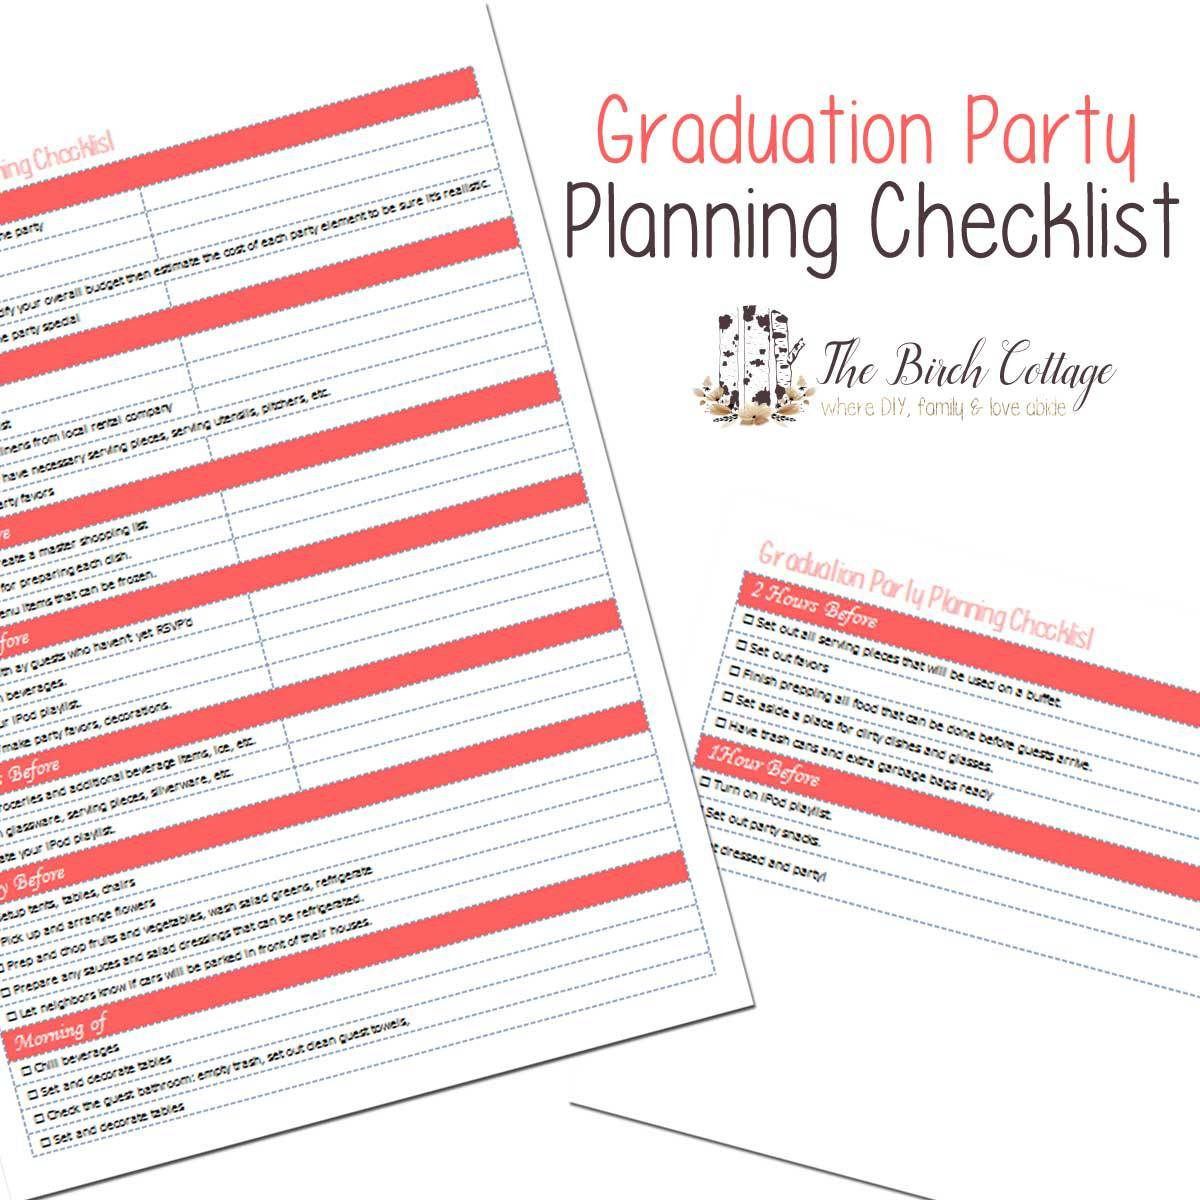 Planning A Graduation Party Ideas
 7 Tips for a Less Stressful Graduation Party and a Free